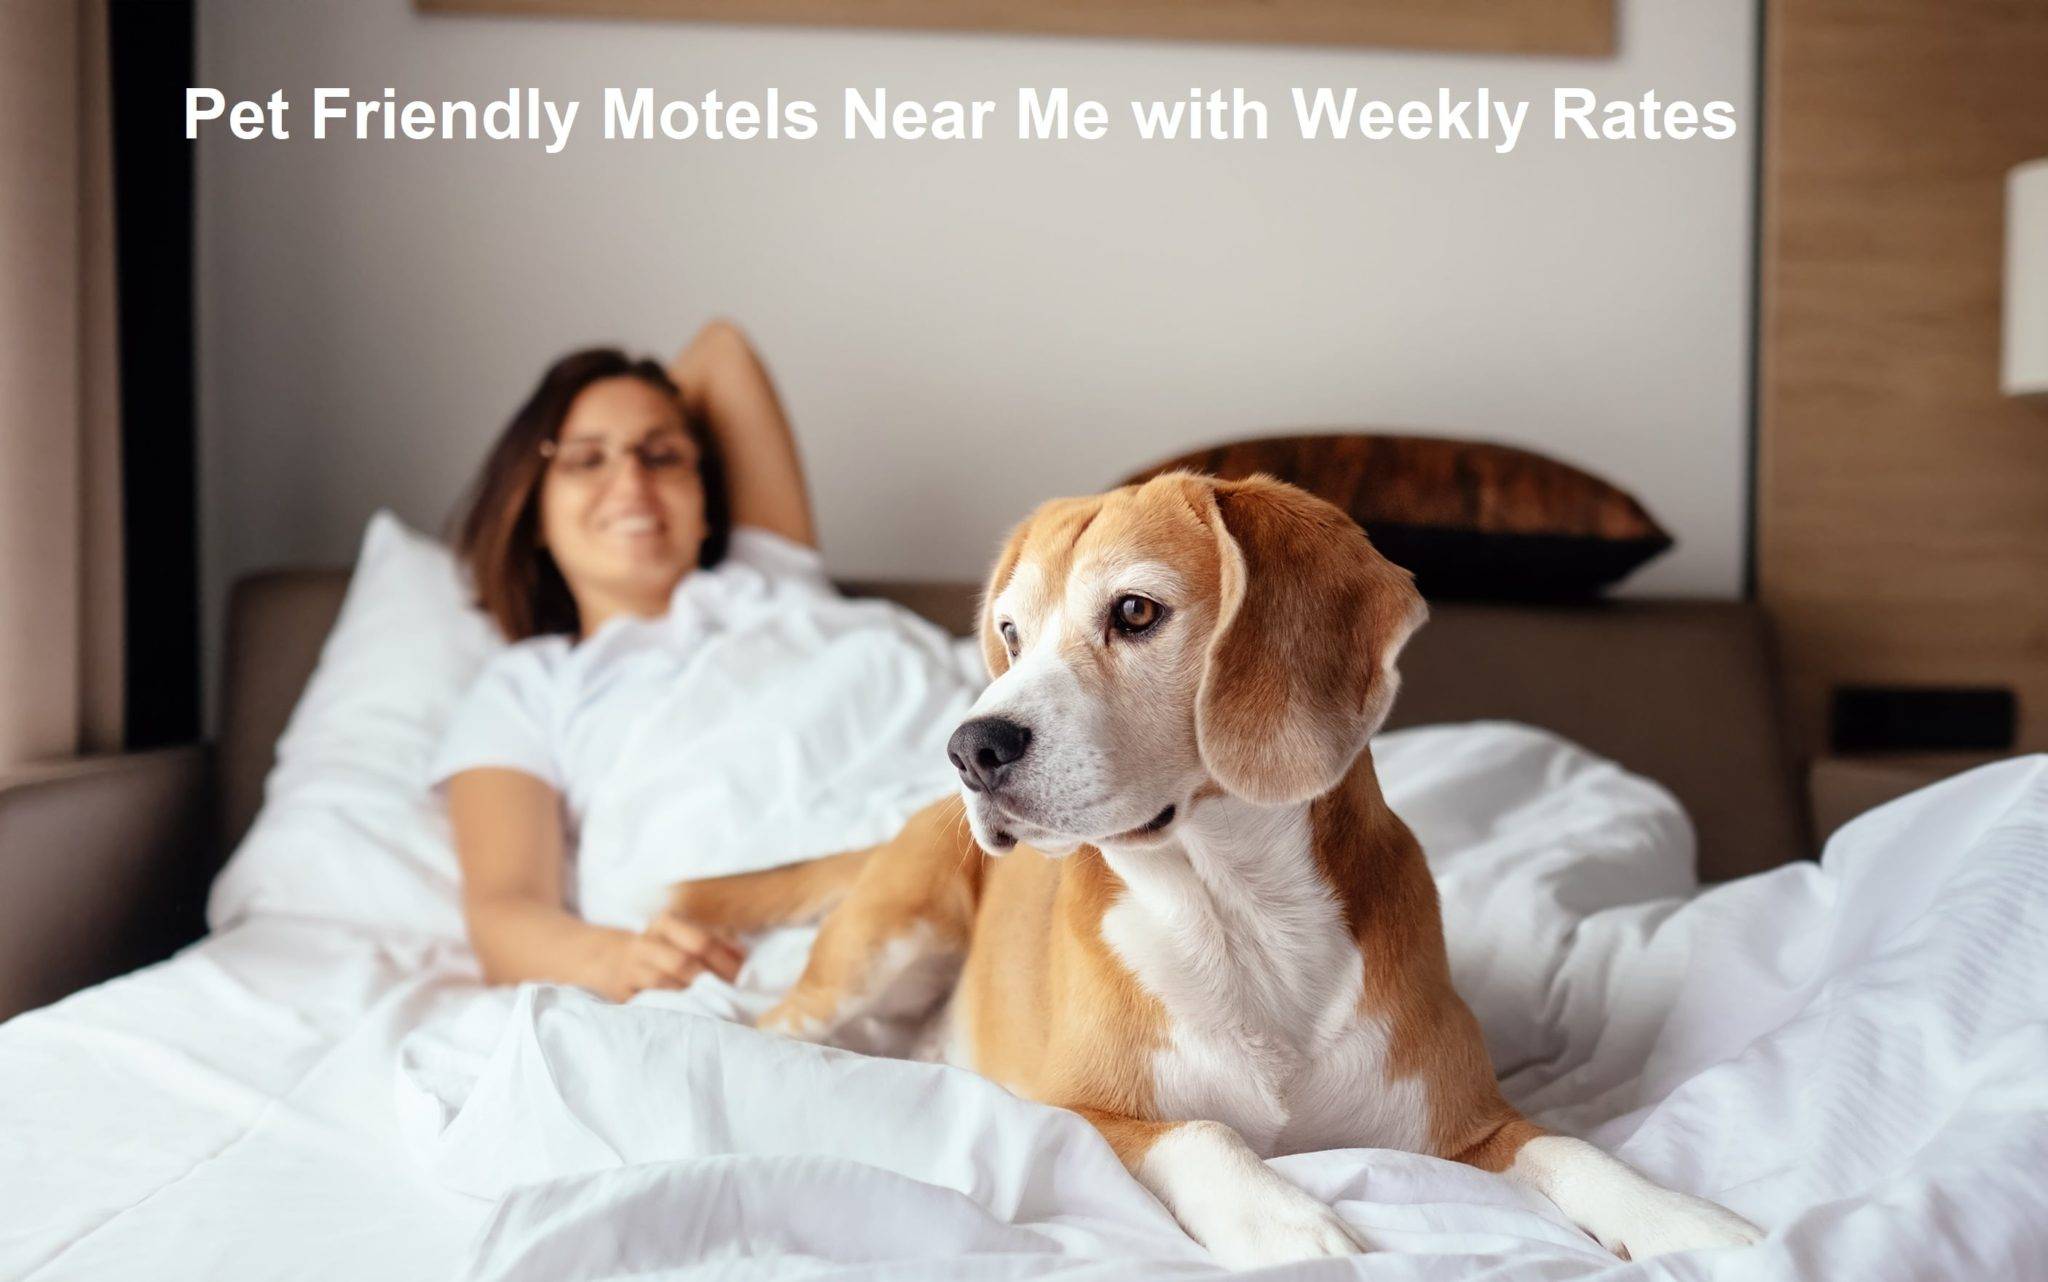 Pet Friendly Motels Near Me with Weekly Rates | Easy to Book Hotel